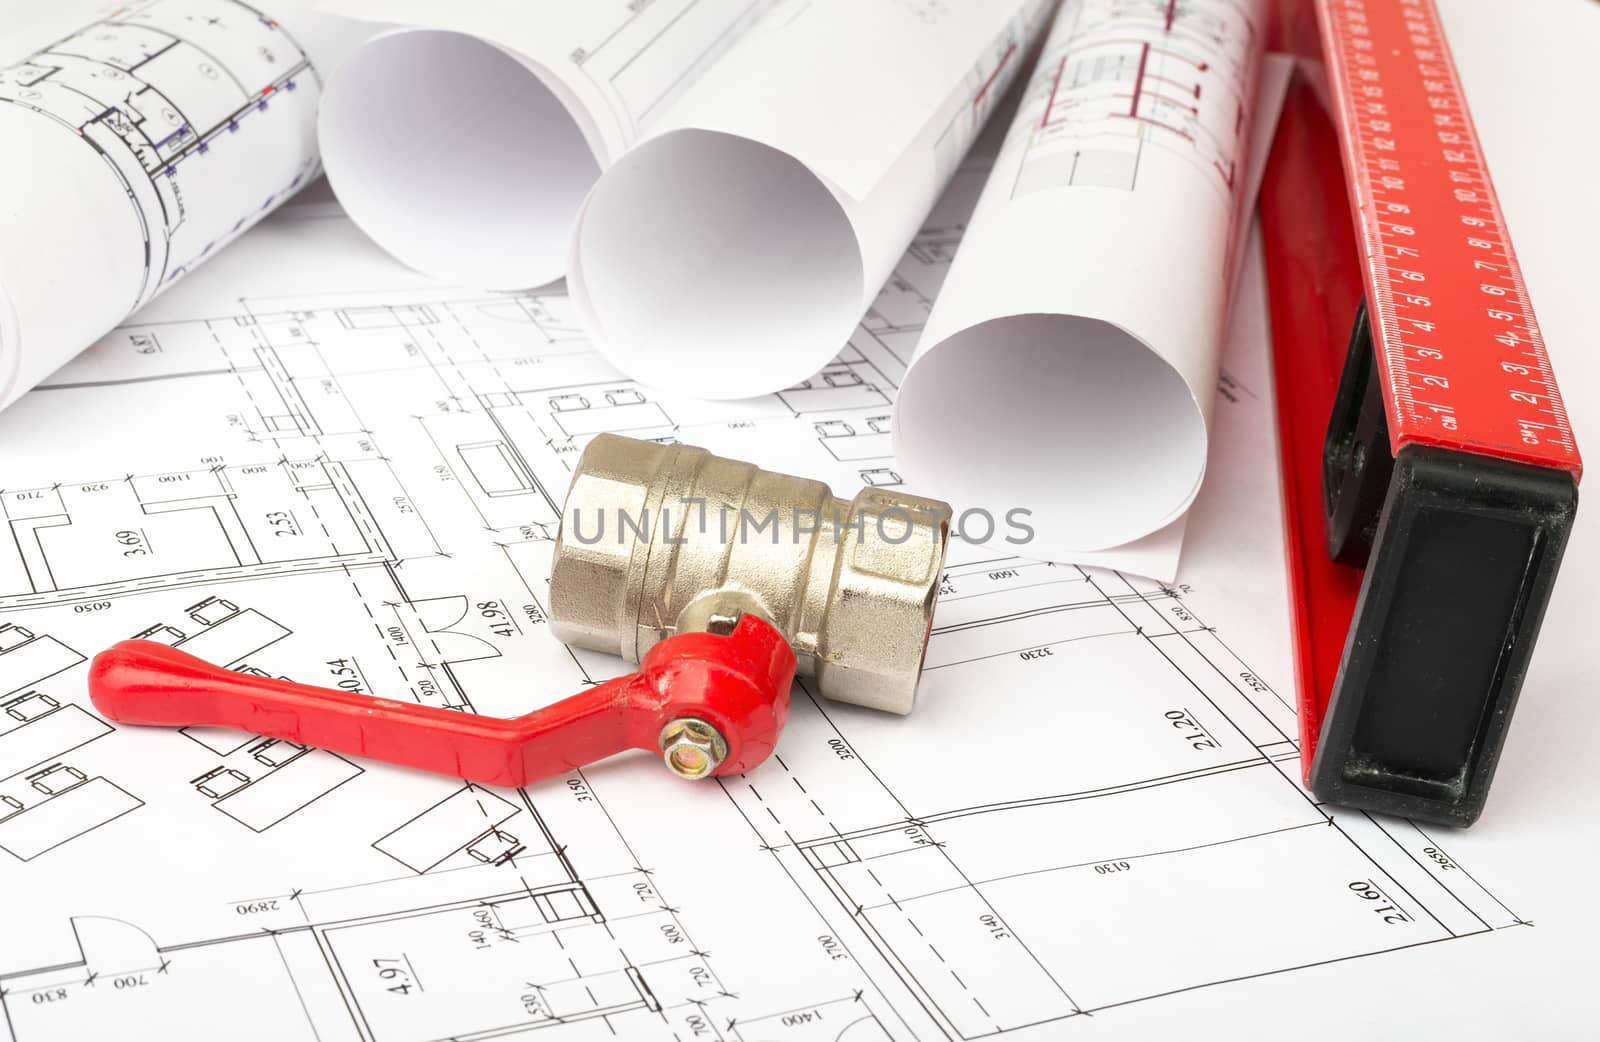 Architecture plan with red mixer tap and level. Building concept